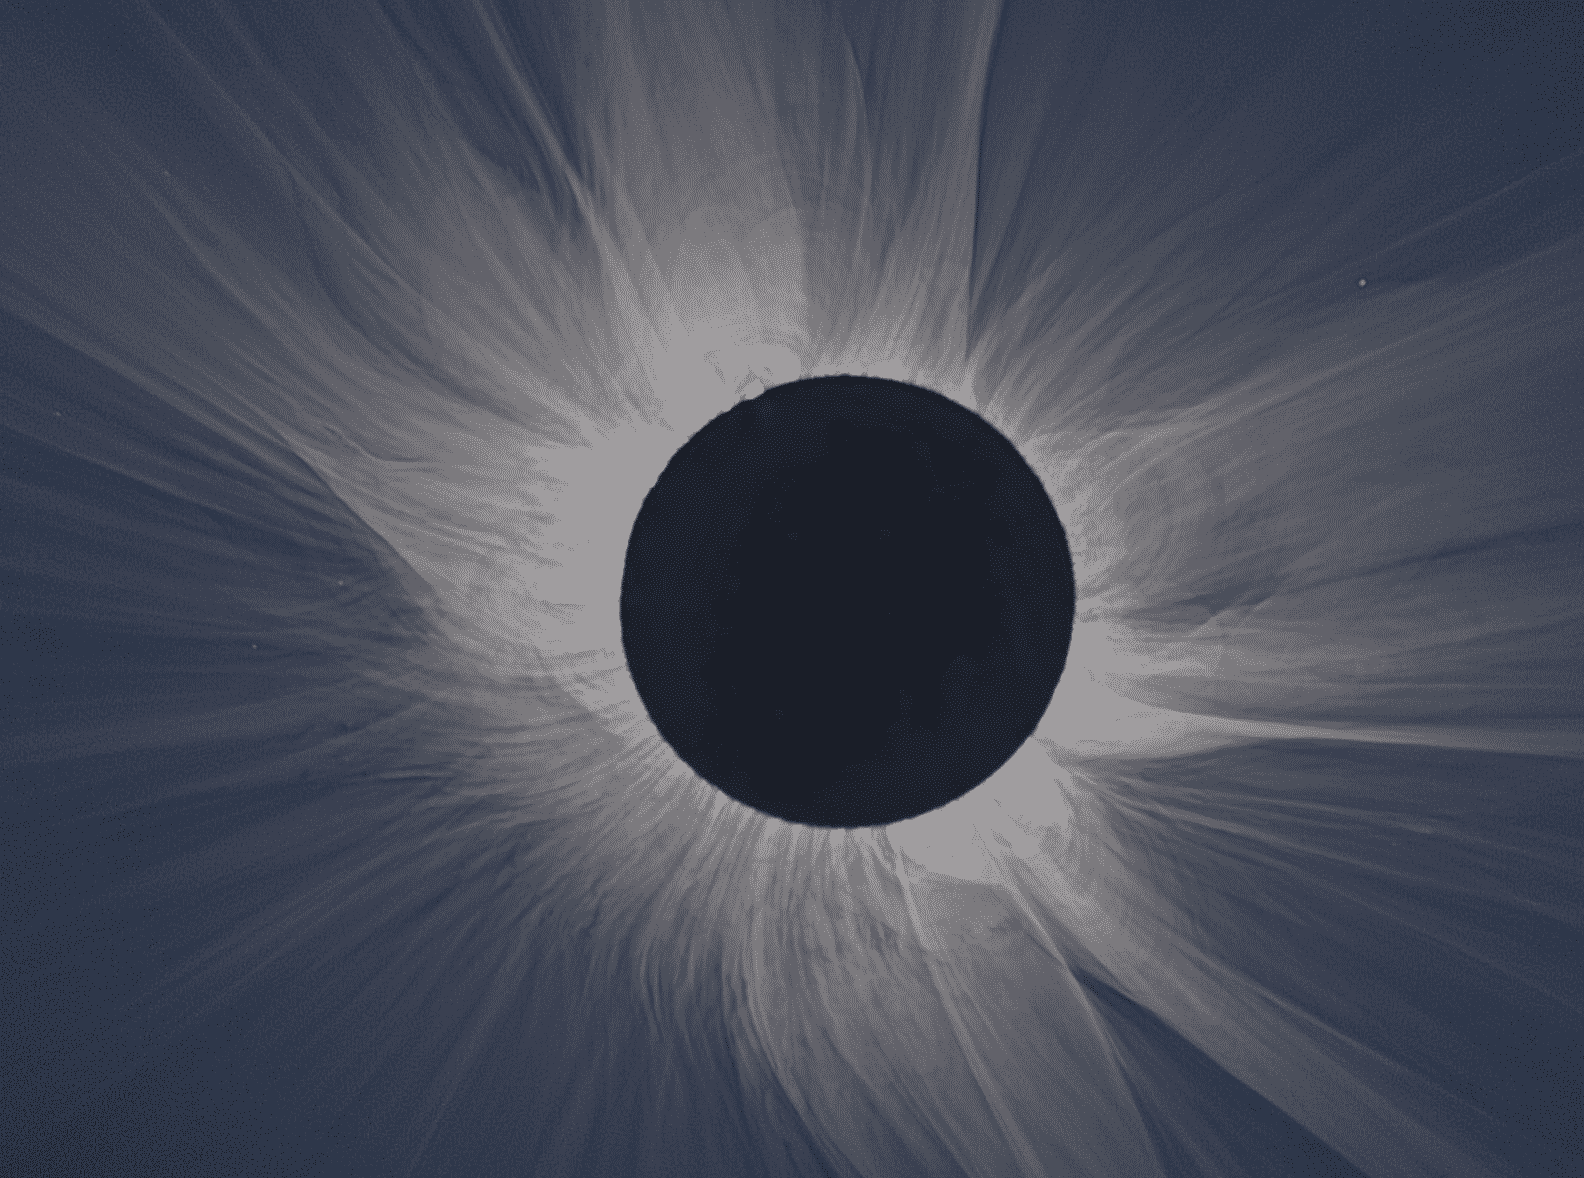 During the totality of the solar eclipse, the sun's outer atmosphere can be seen.